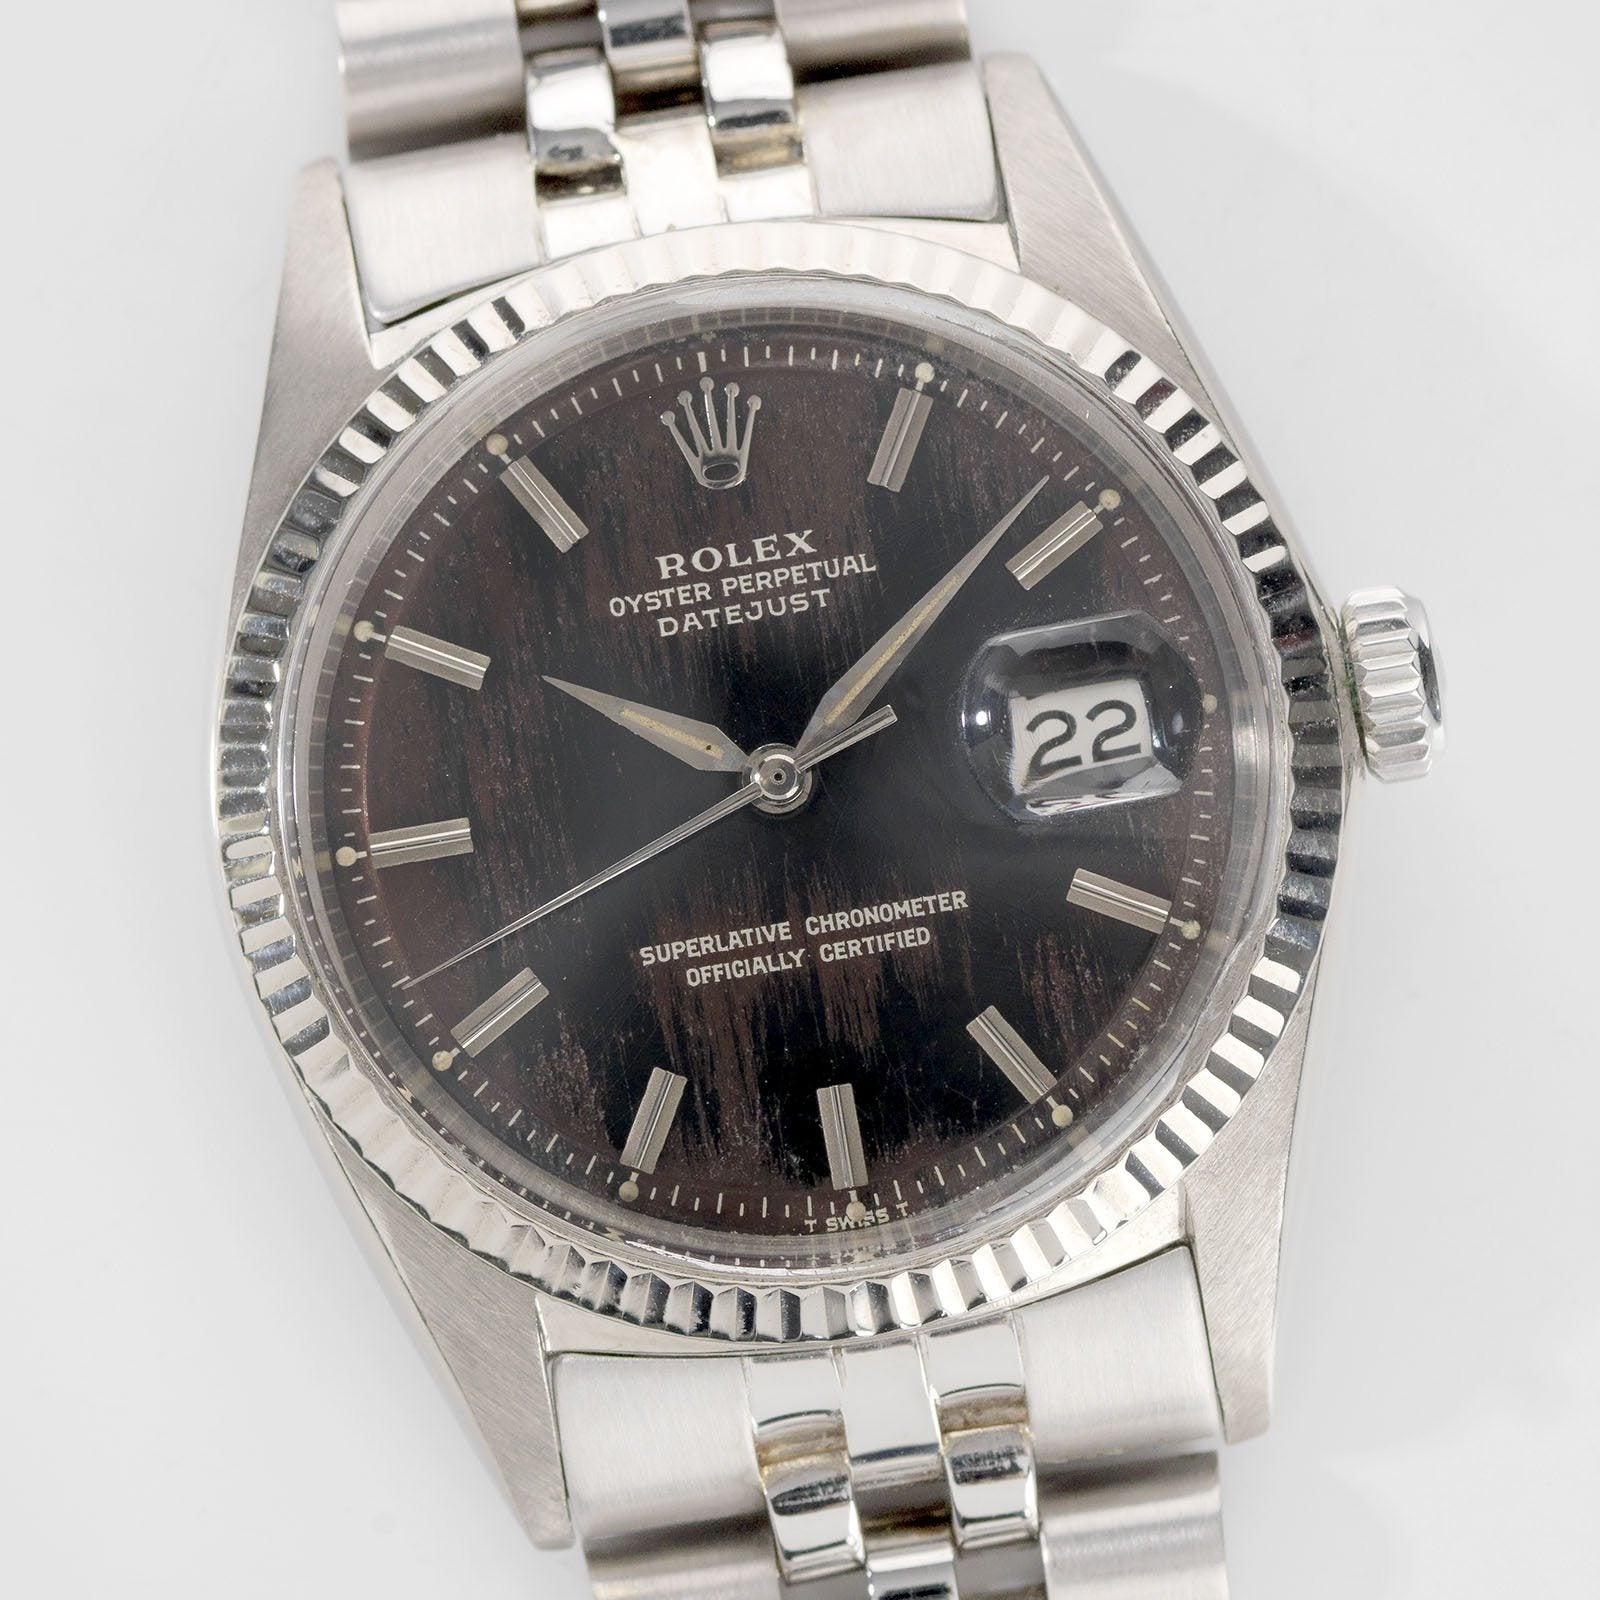 Rolex White Gold Datejust Tropical Dial Reference 1601